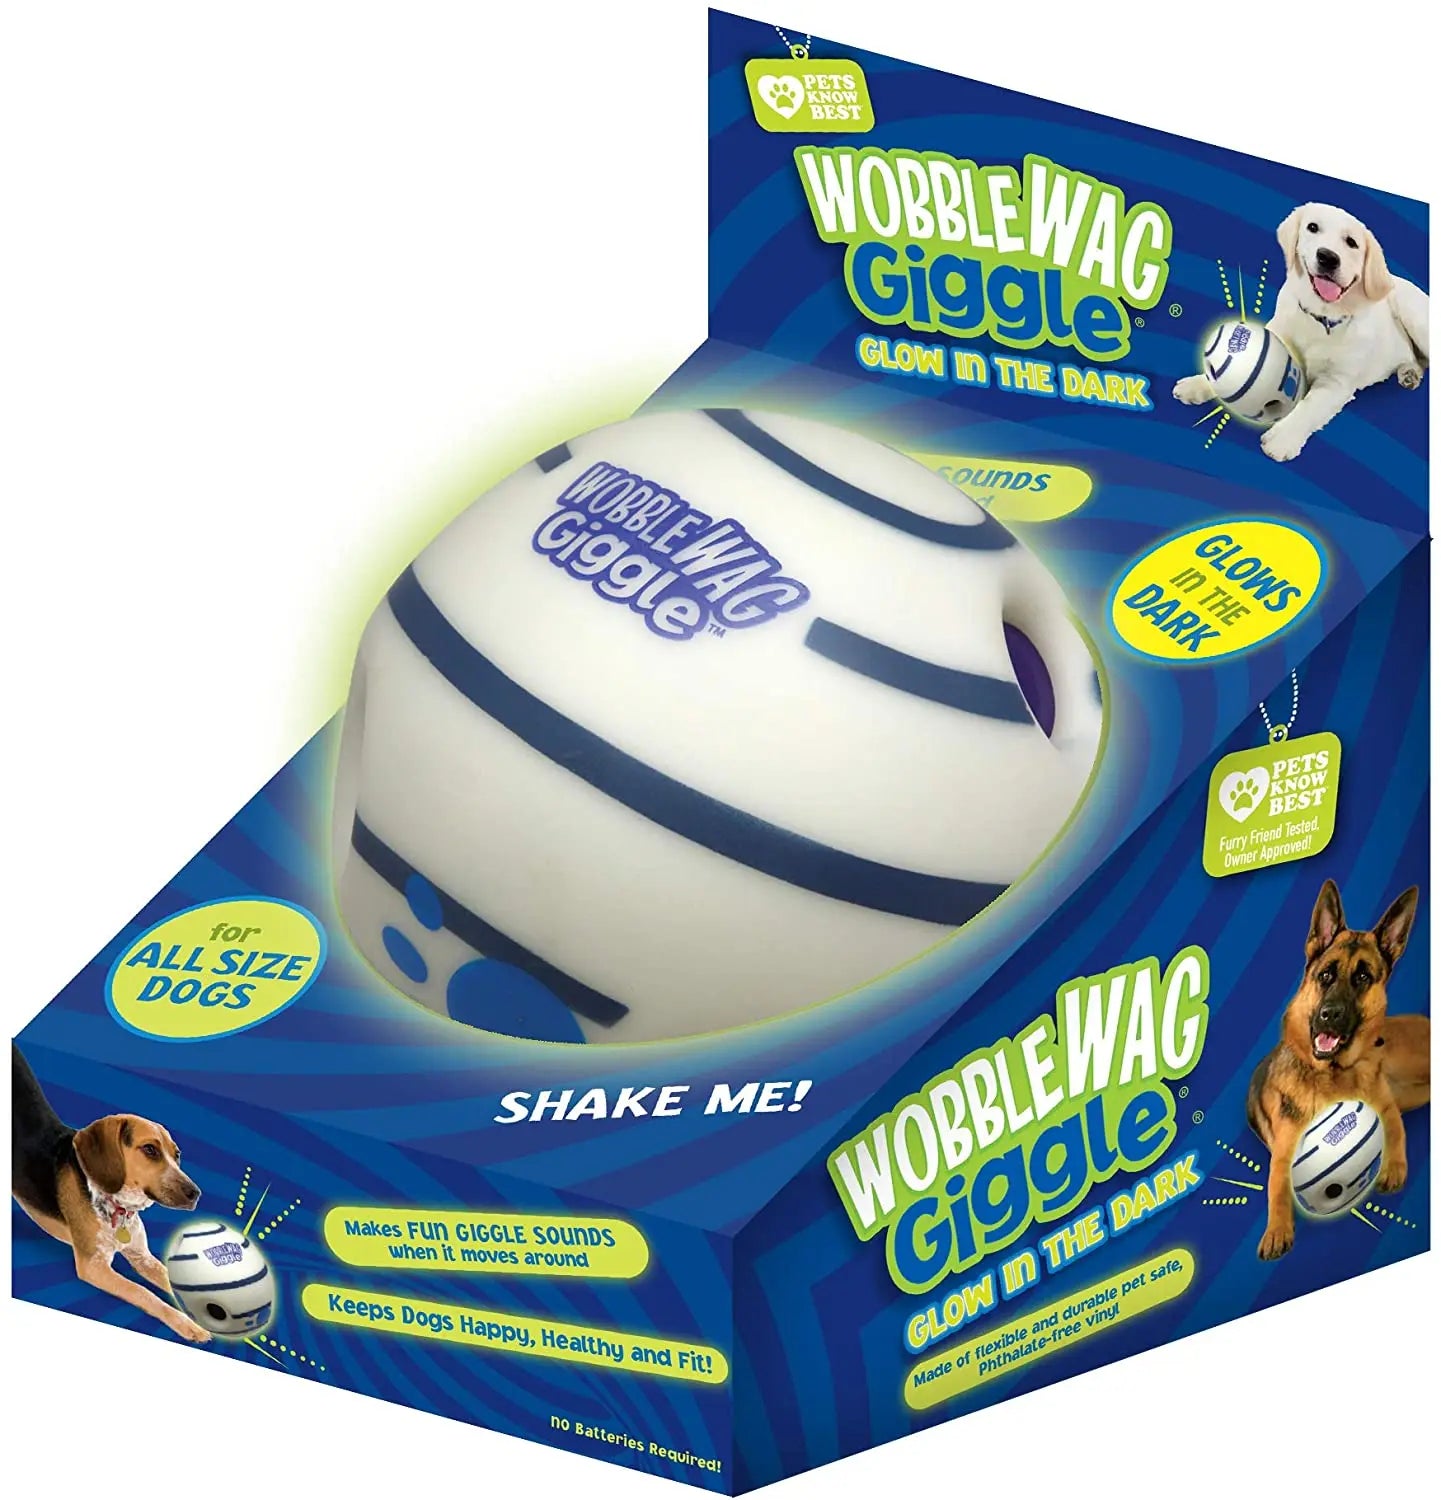 Wobble Wag Giggle Glow Ball Interactive Dog Toy Fun Giggle Sounds When Rolled or Shaken Pets Know Best As Seen On TV